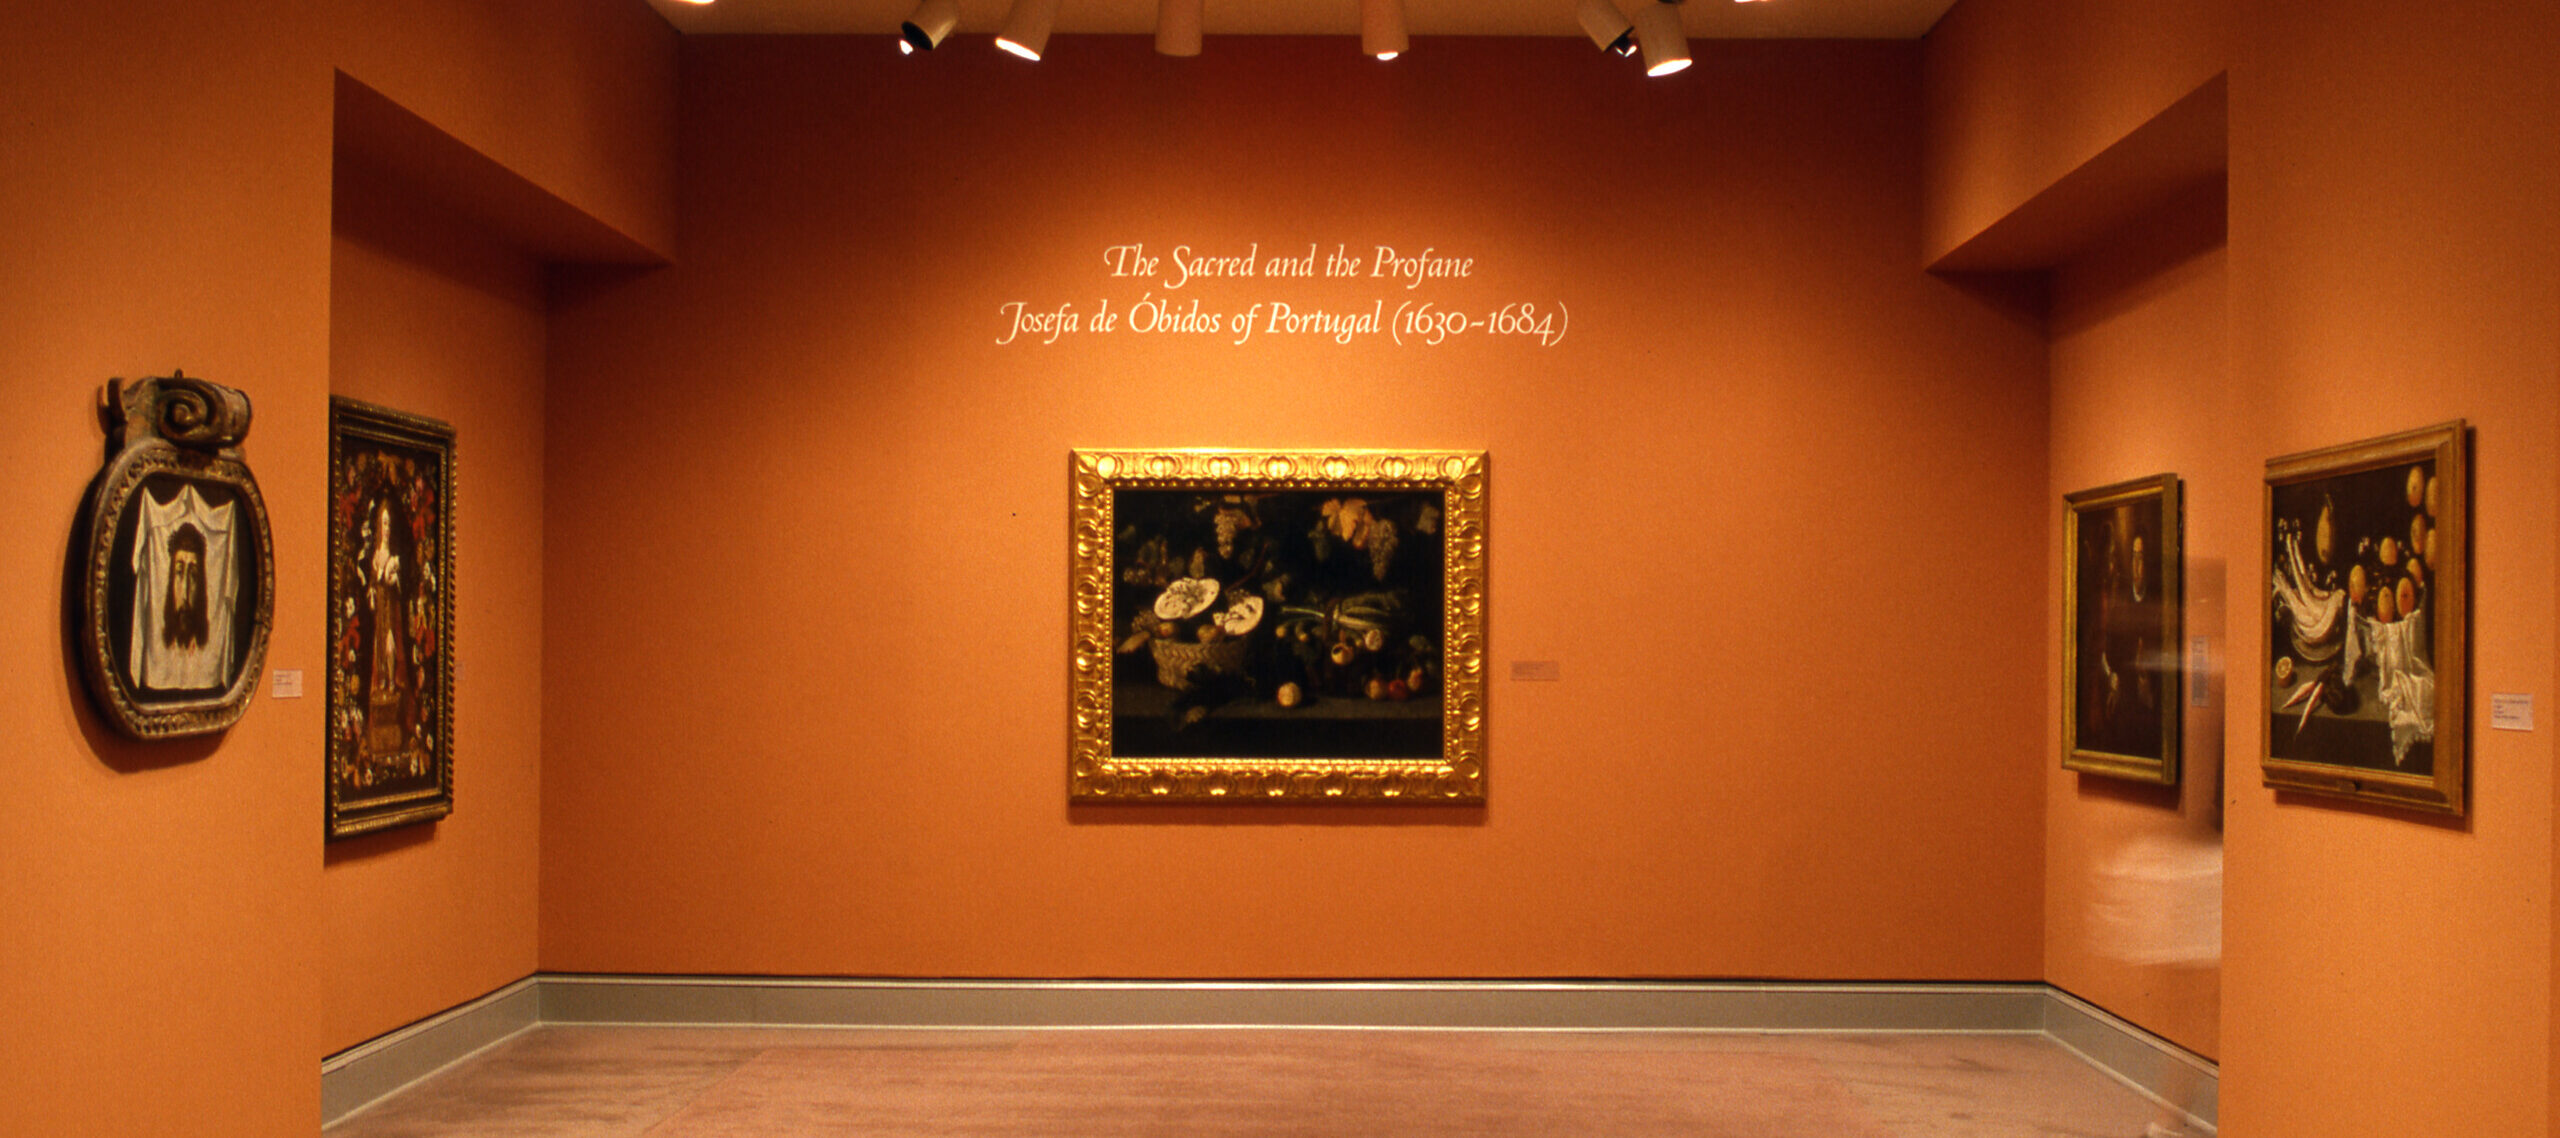 View of a gallery space with orange walls. Several artworks featuring Christian themes in golden frames are hanging on the wall. In the center, a wall text reads: 